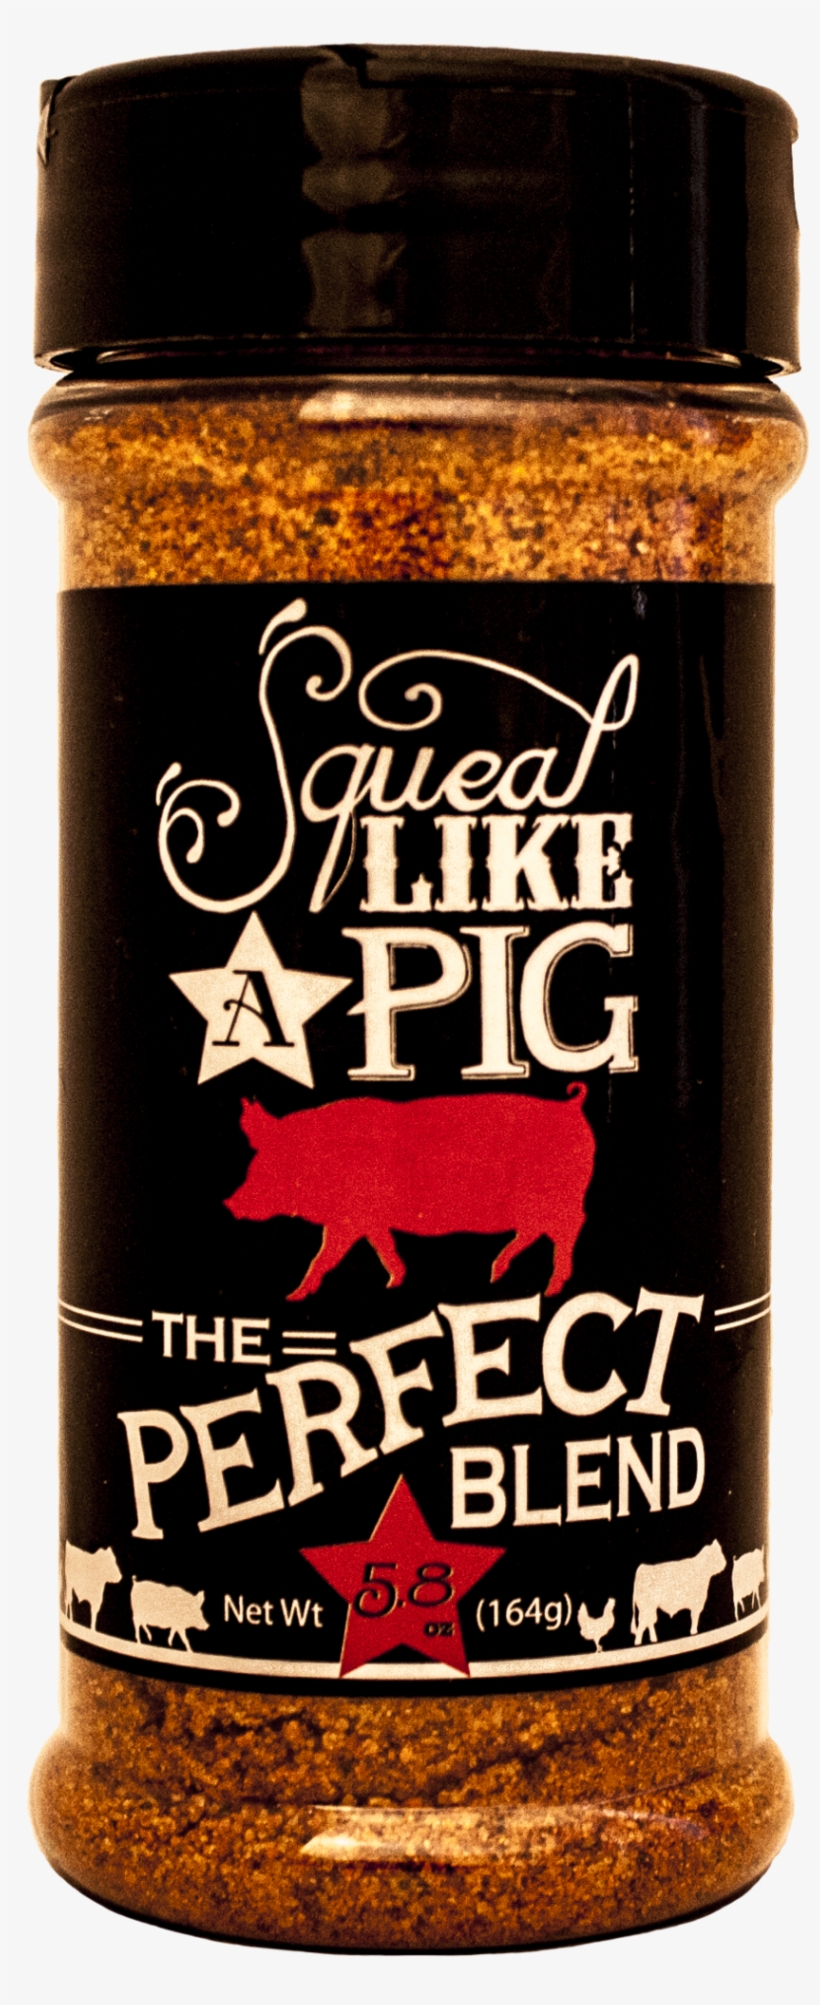 Squeal Like A Pig The Perfect Blend - Pork, transparent png #5535877